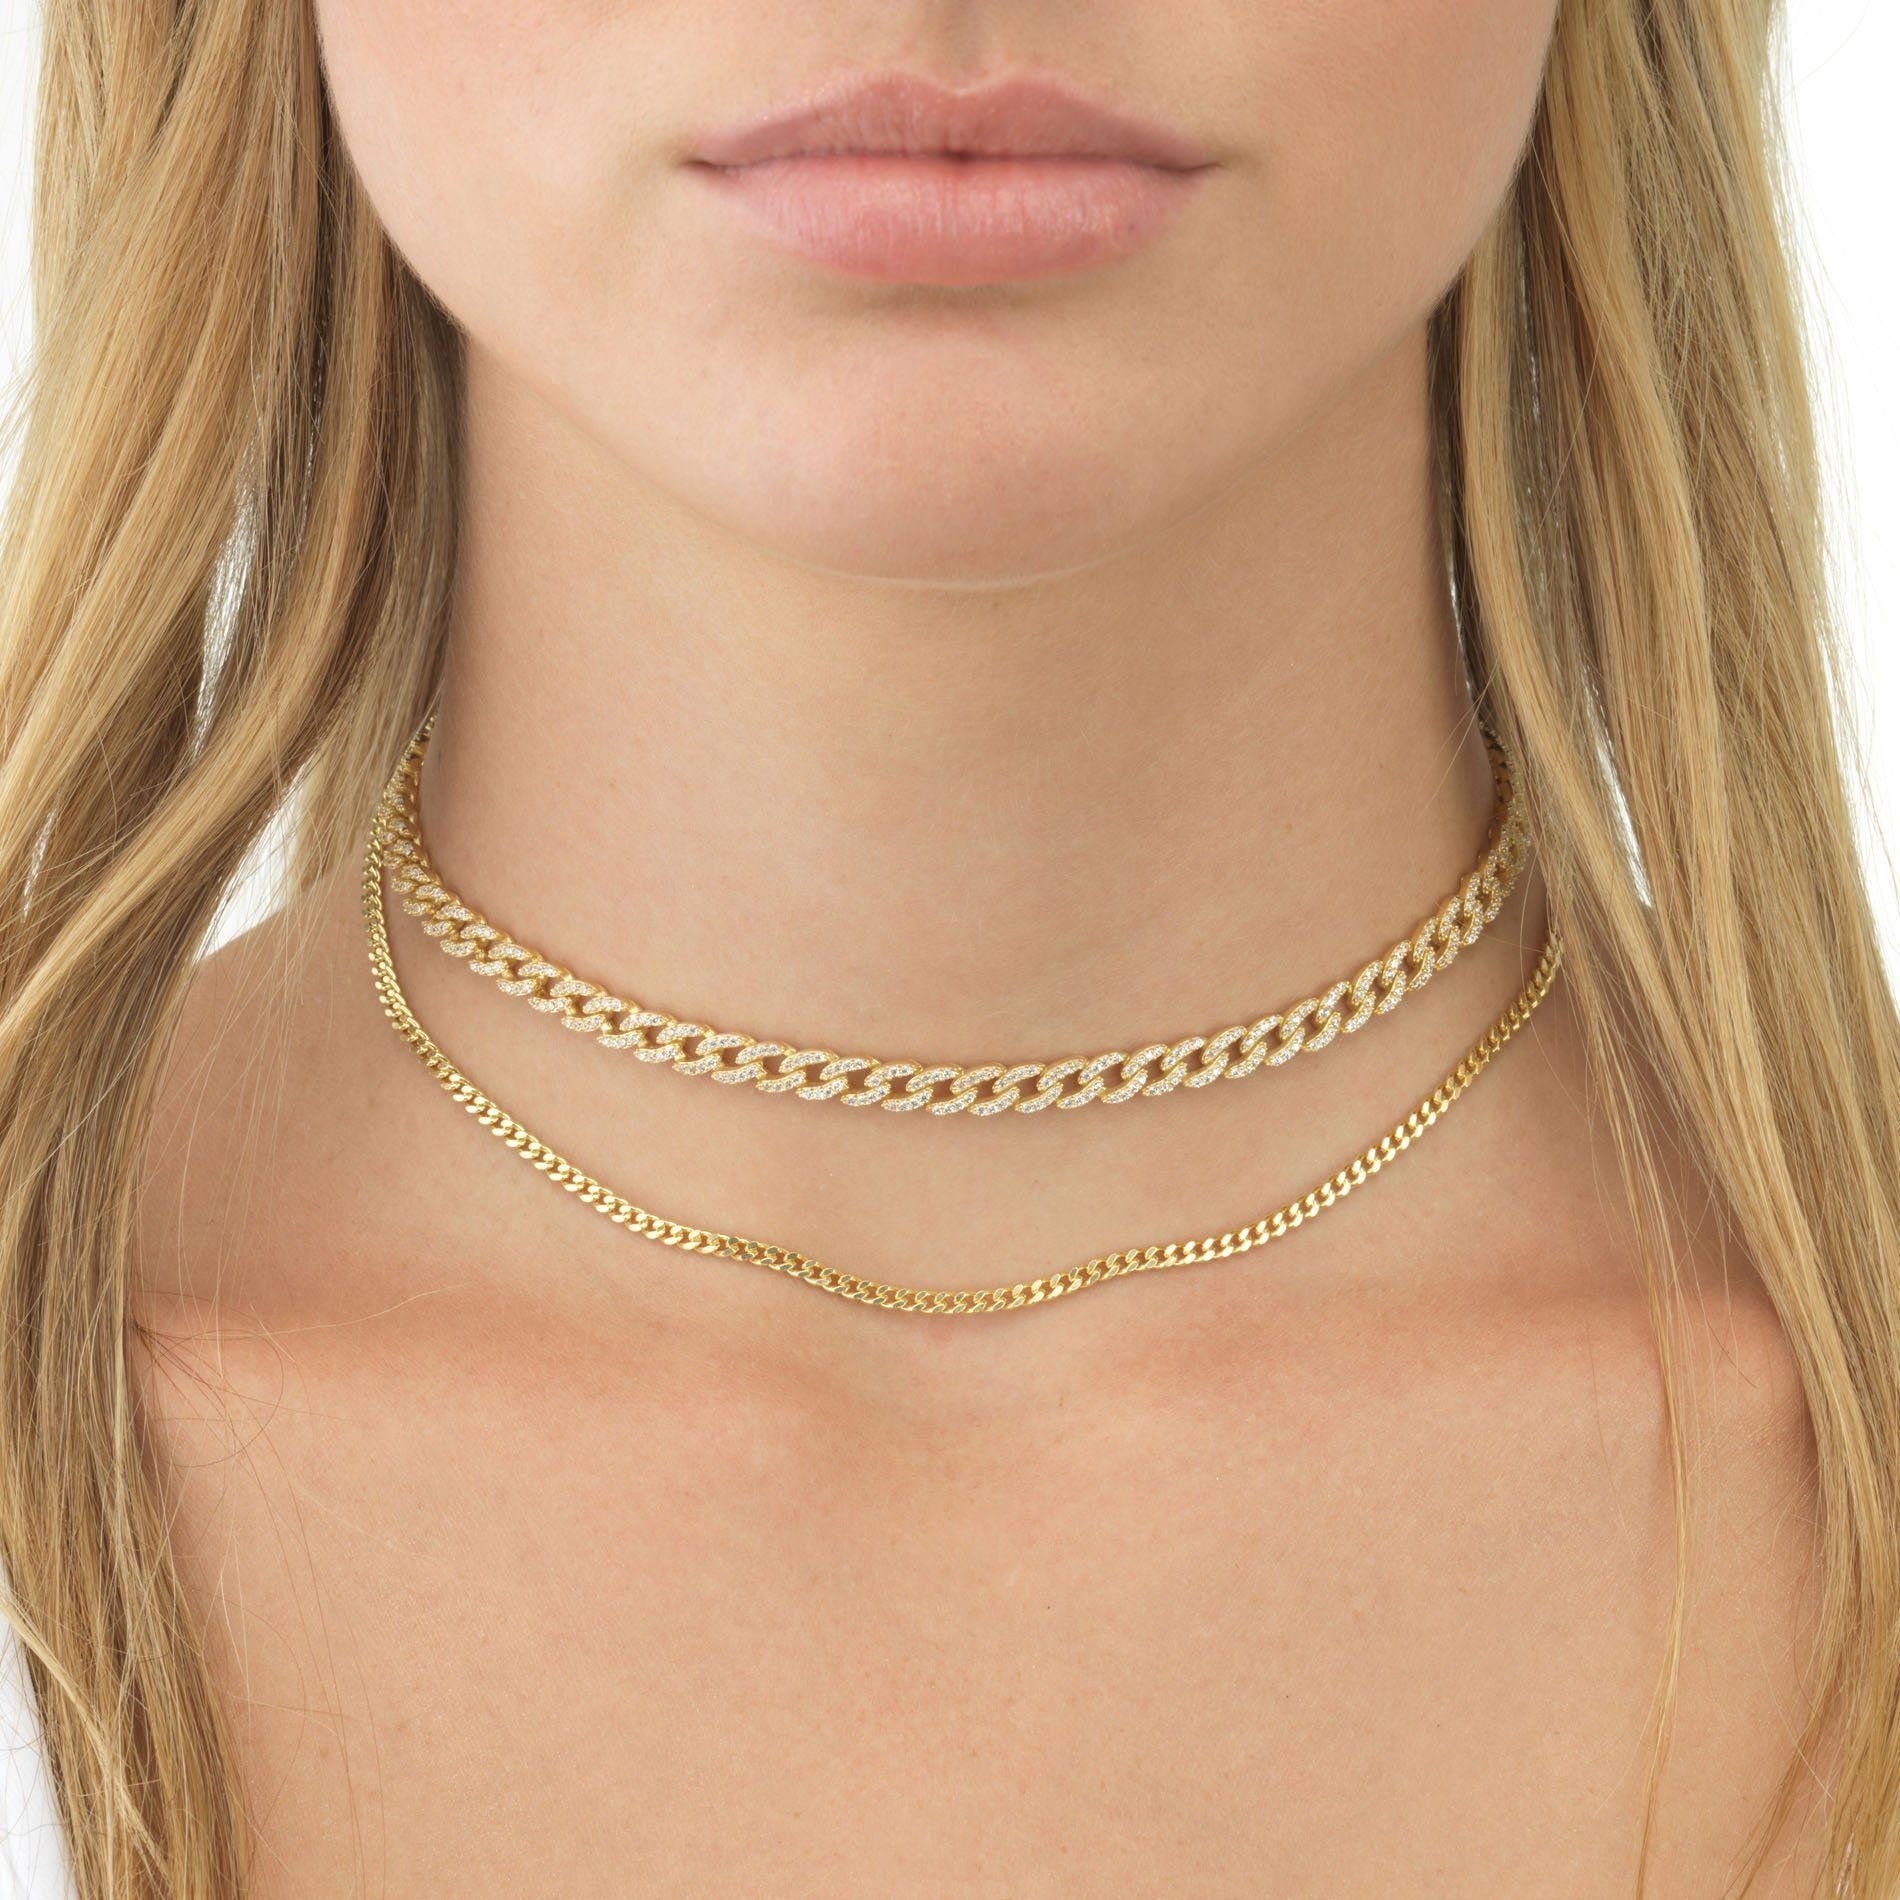 14K Solid Gold Cuban Chain Necklace, Chain for Women, Curb Chain,  Minimalist Gold Necklace, Everyday Wear Jewelry, Perfect Gift for Her 